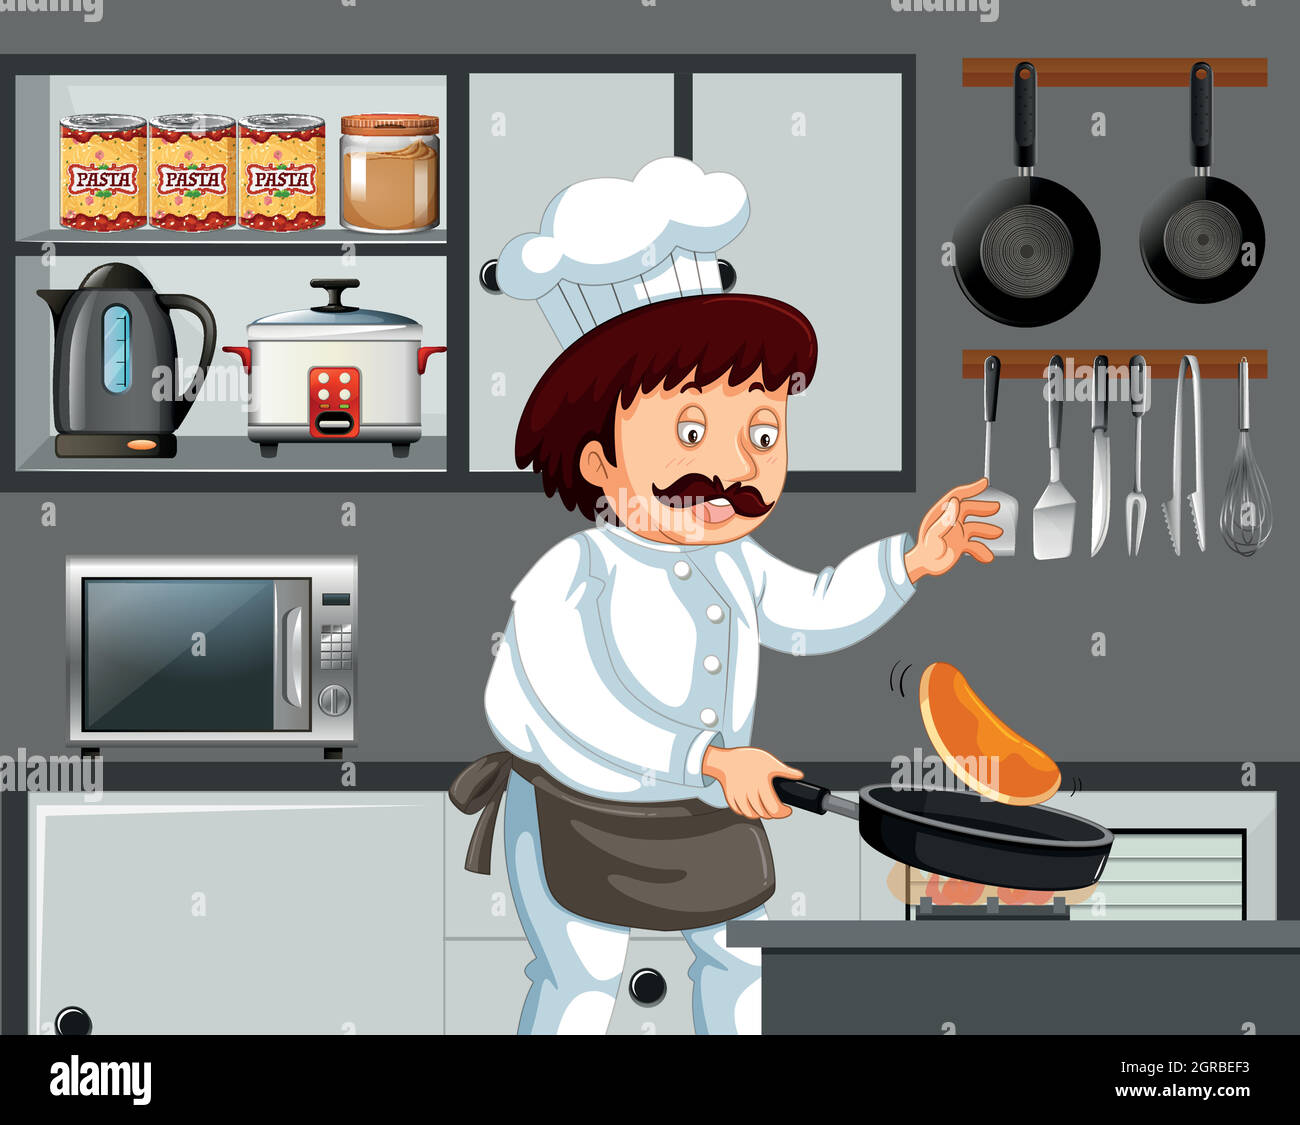 A Chef Cooking Pancake in Kitchen Stock Vector